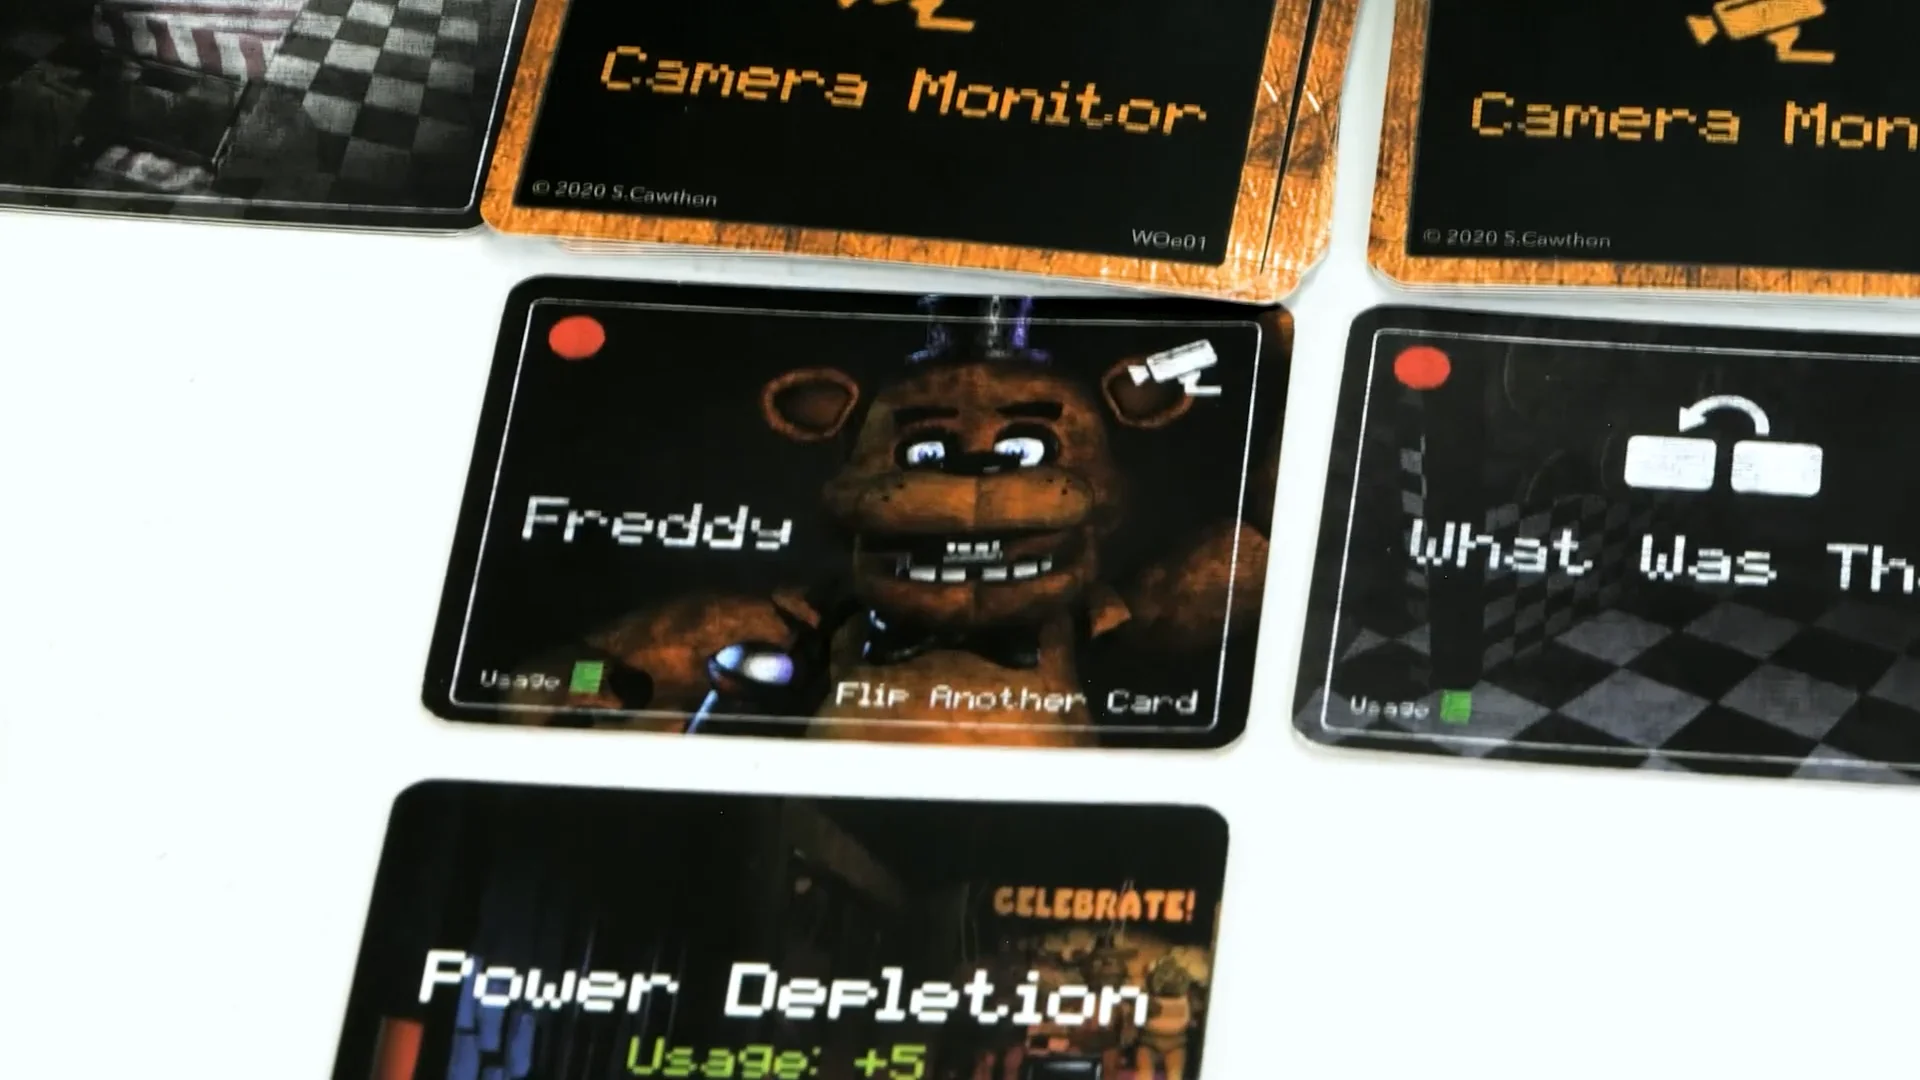 Five Nights at Freddy Survive 'Til 6AM Security Breach Edition